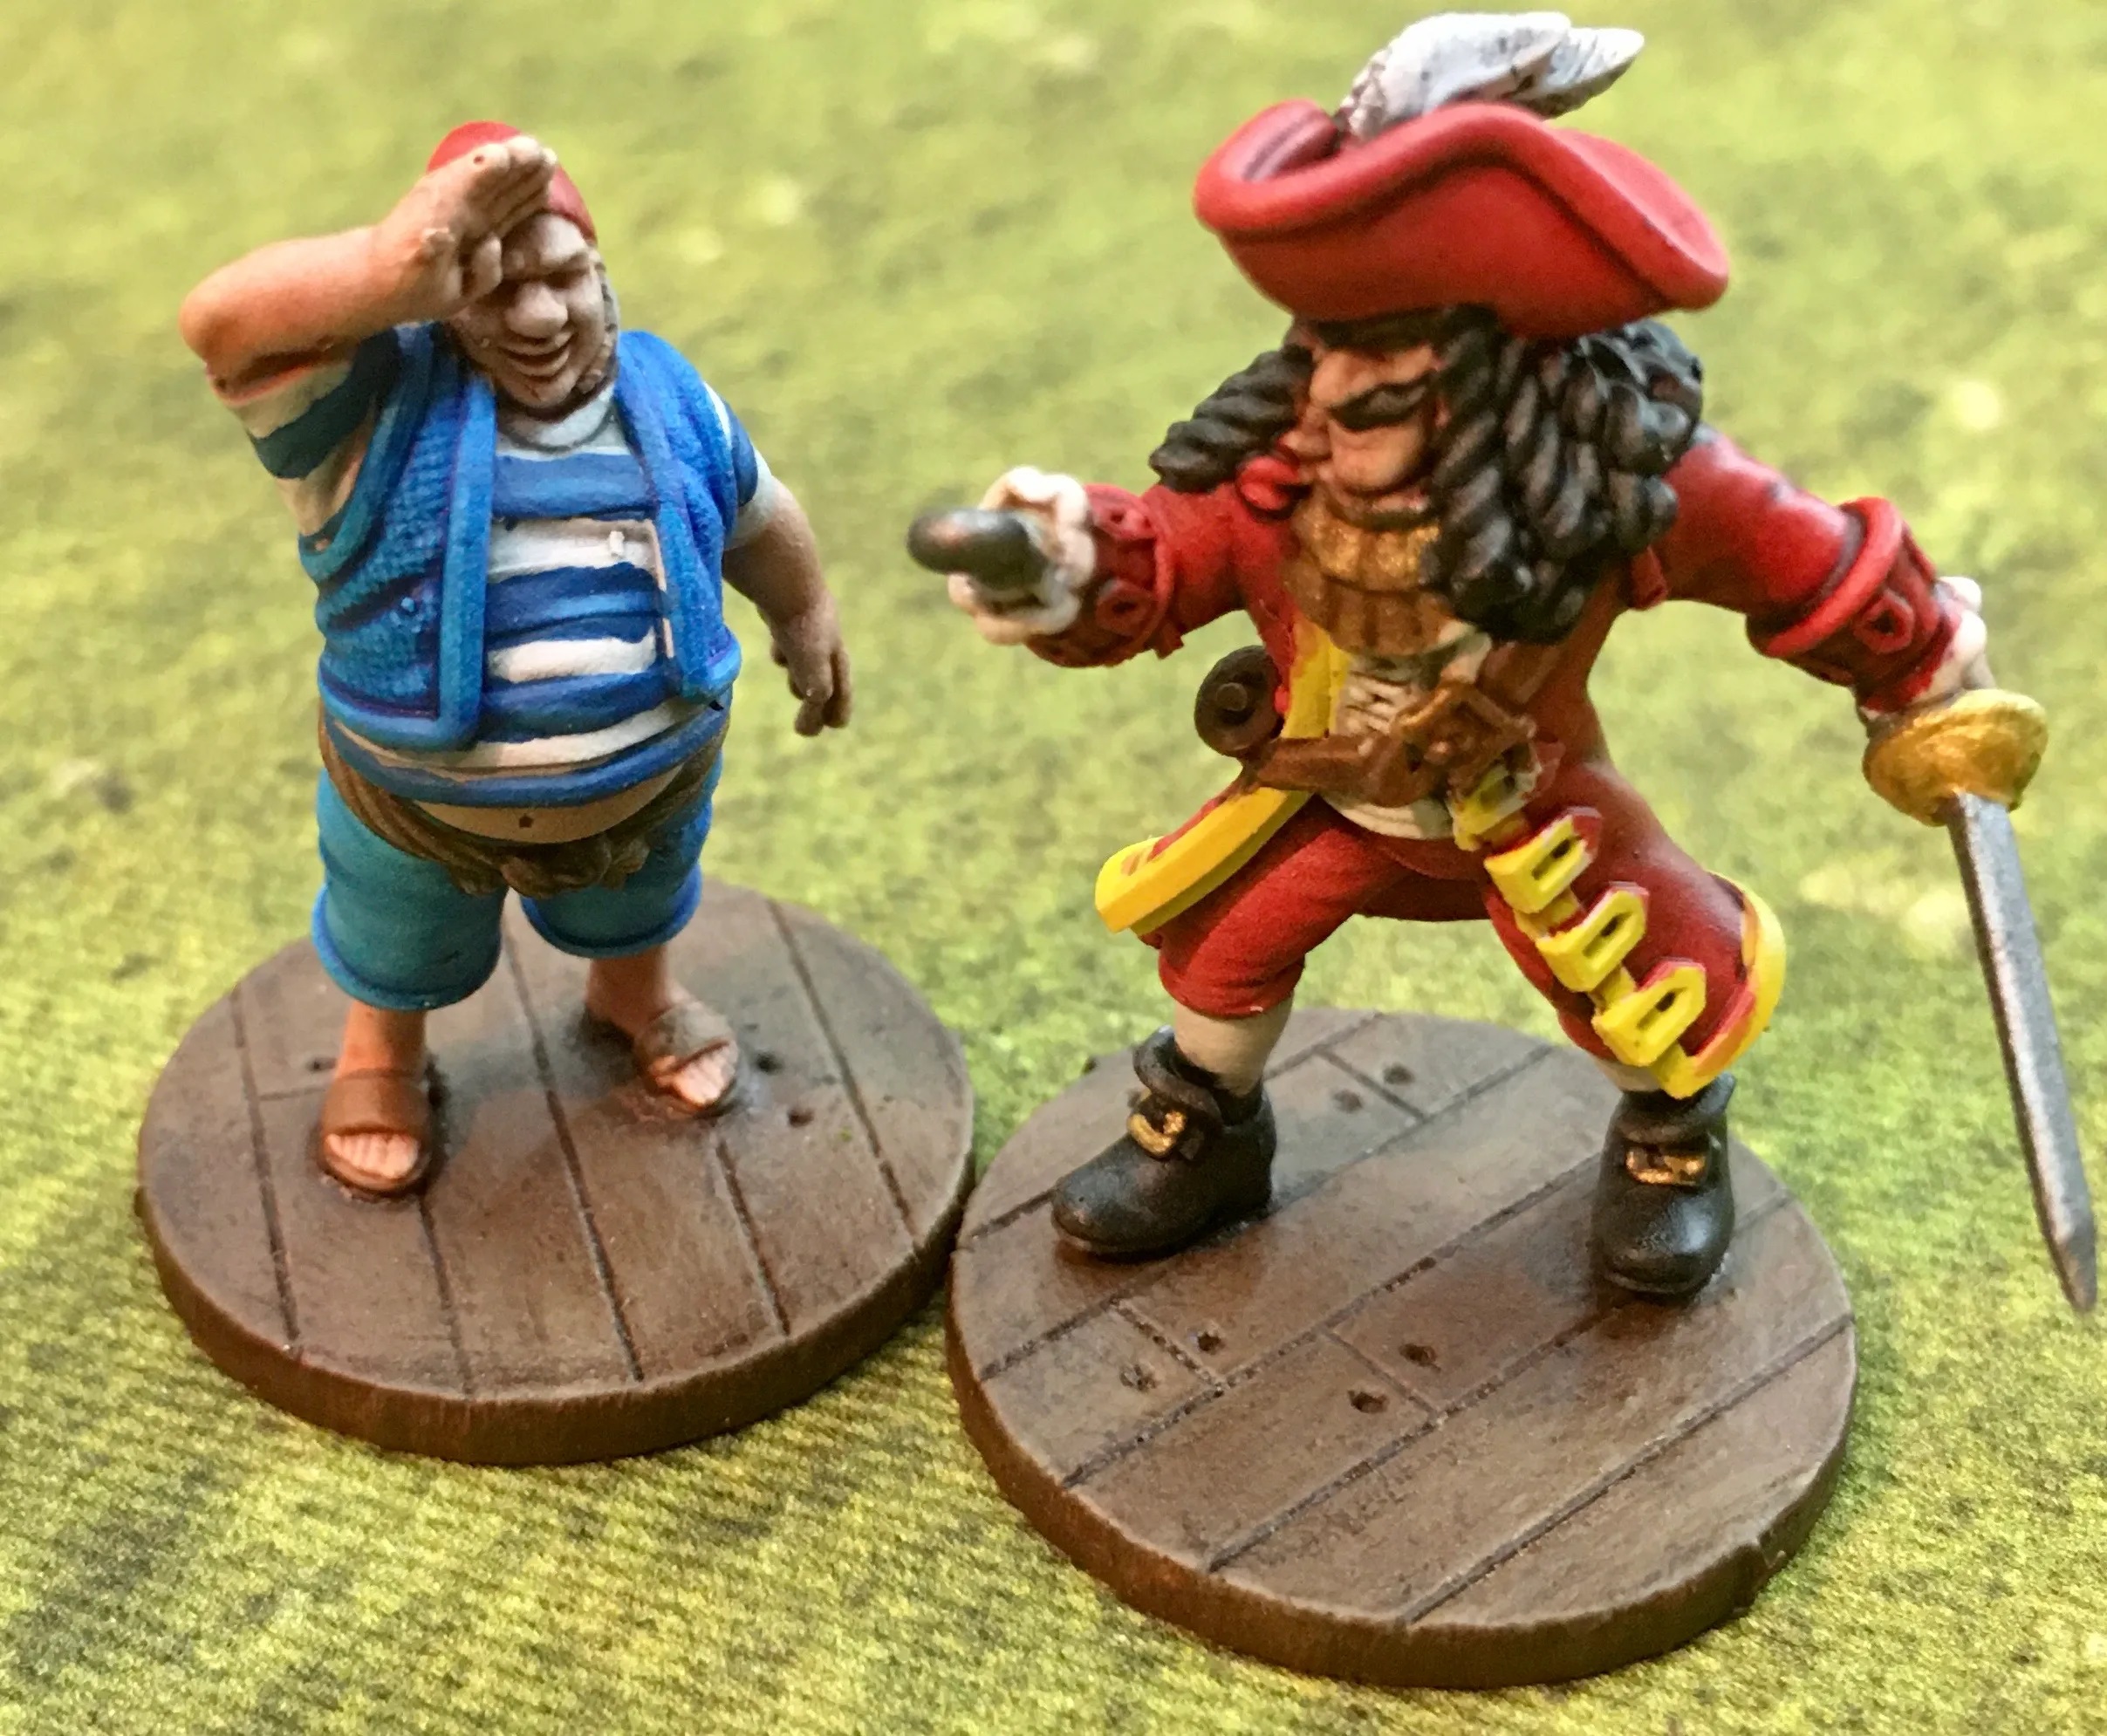 28mm-Captain-Hook-Smee-2